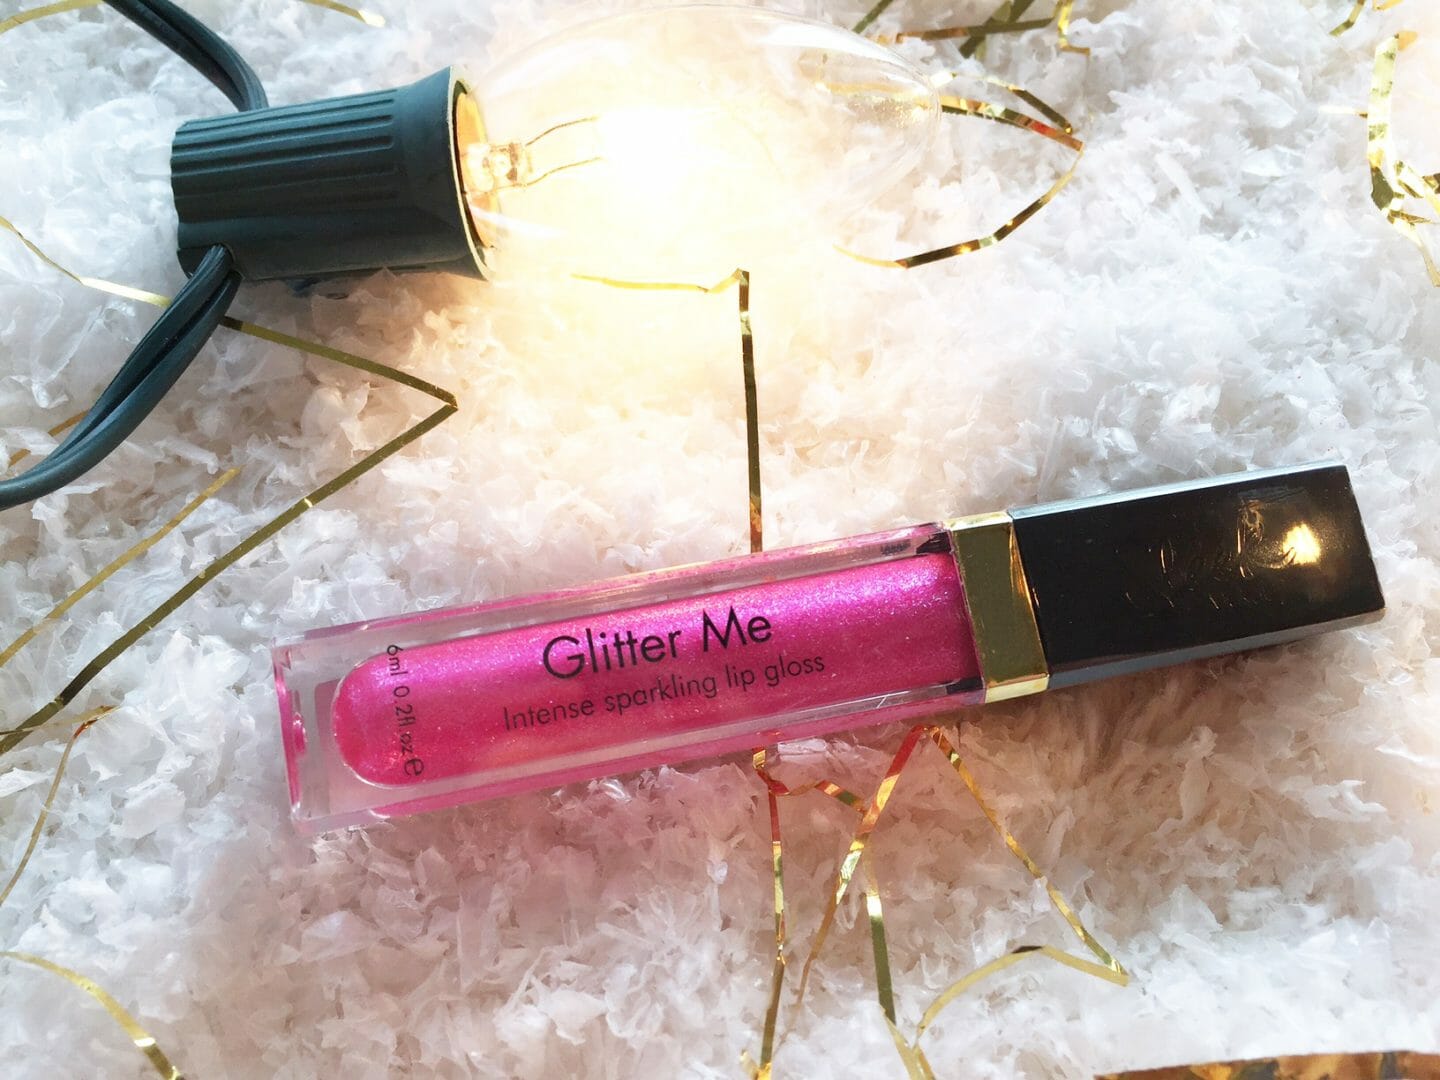 A lipgloss that adds the perfect amount of shine.